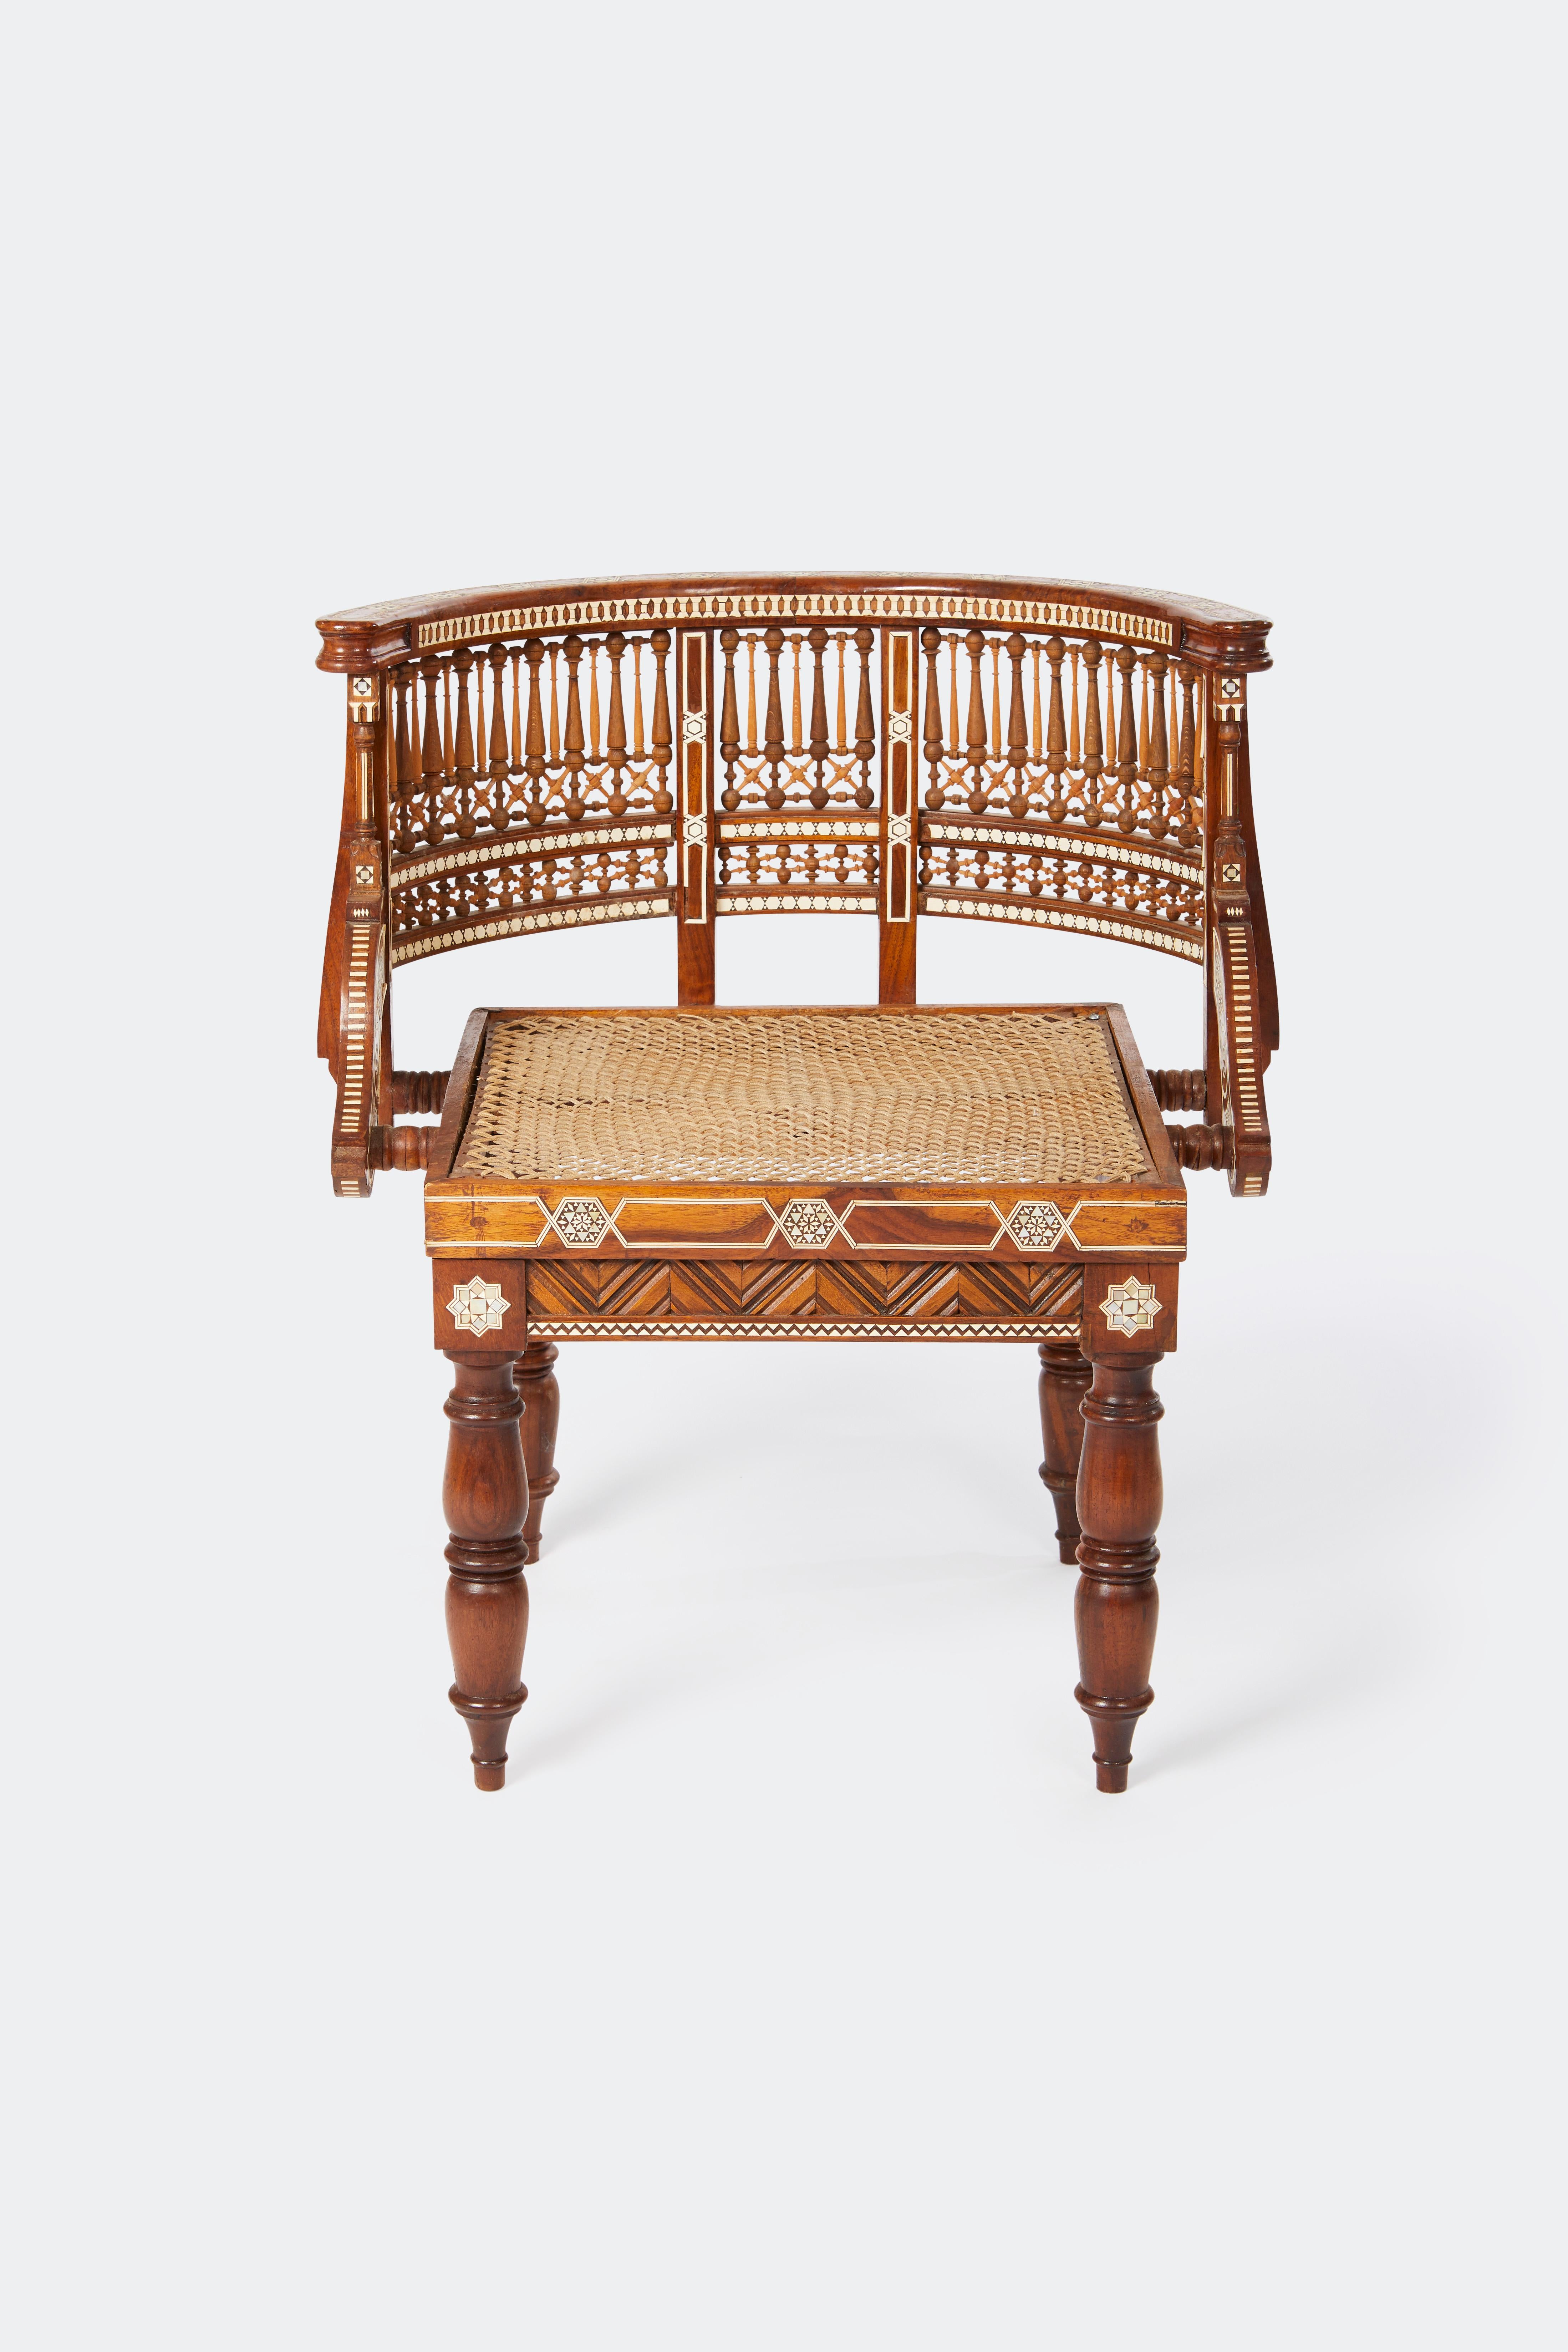 Early 20th Century Pair of Moroccan Inlaid Rosewood Chairs